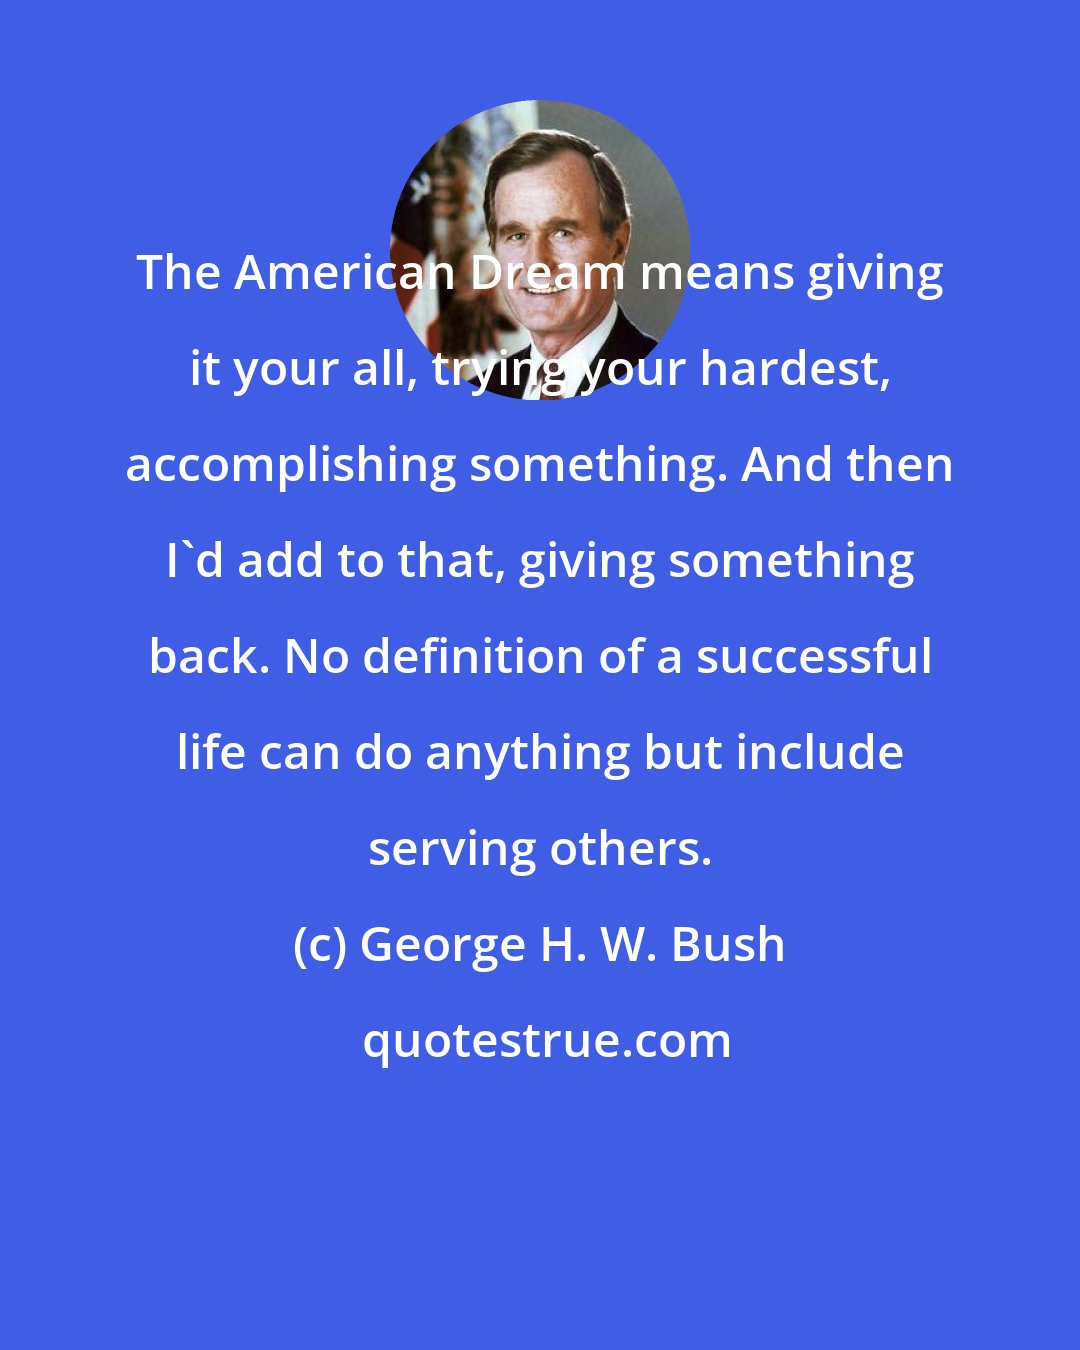 George H. W. Bush: The American Dream means giving it your all, trying your hardest, accomplishing something. And then I'd add to that, giving something back. No definition of a successful life can do anything but include serving others.